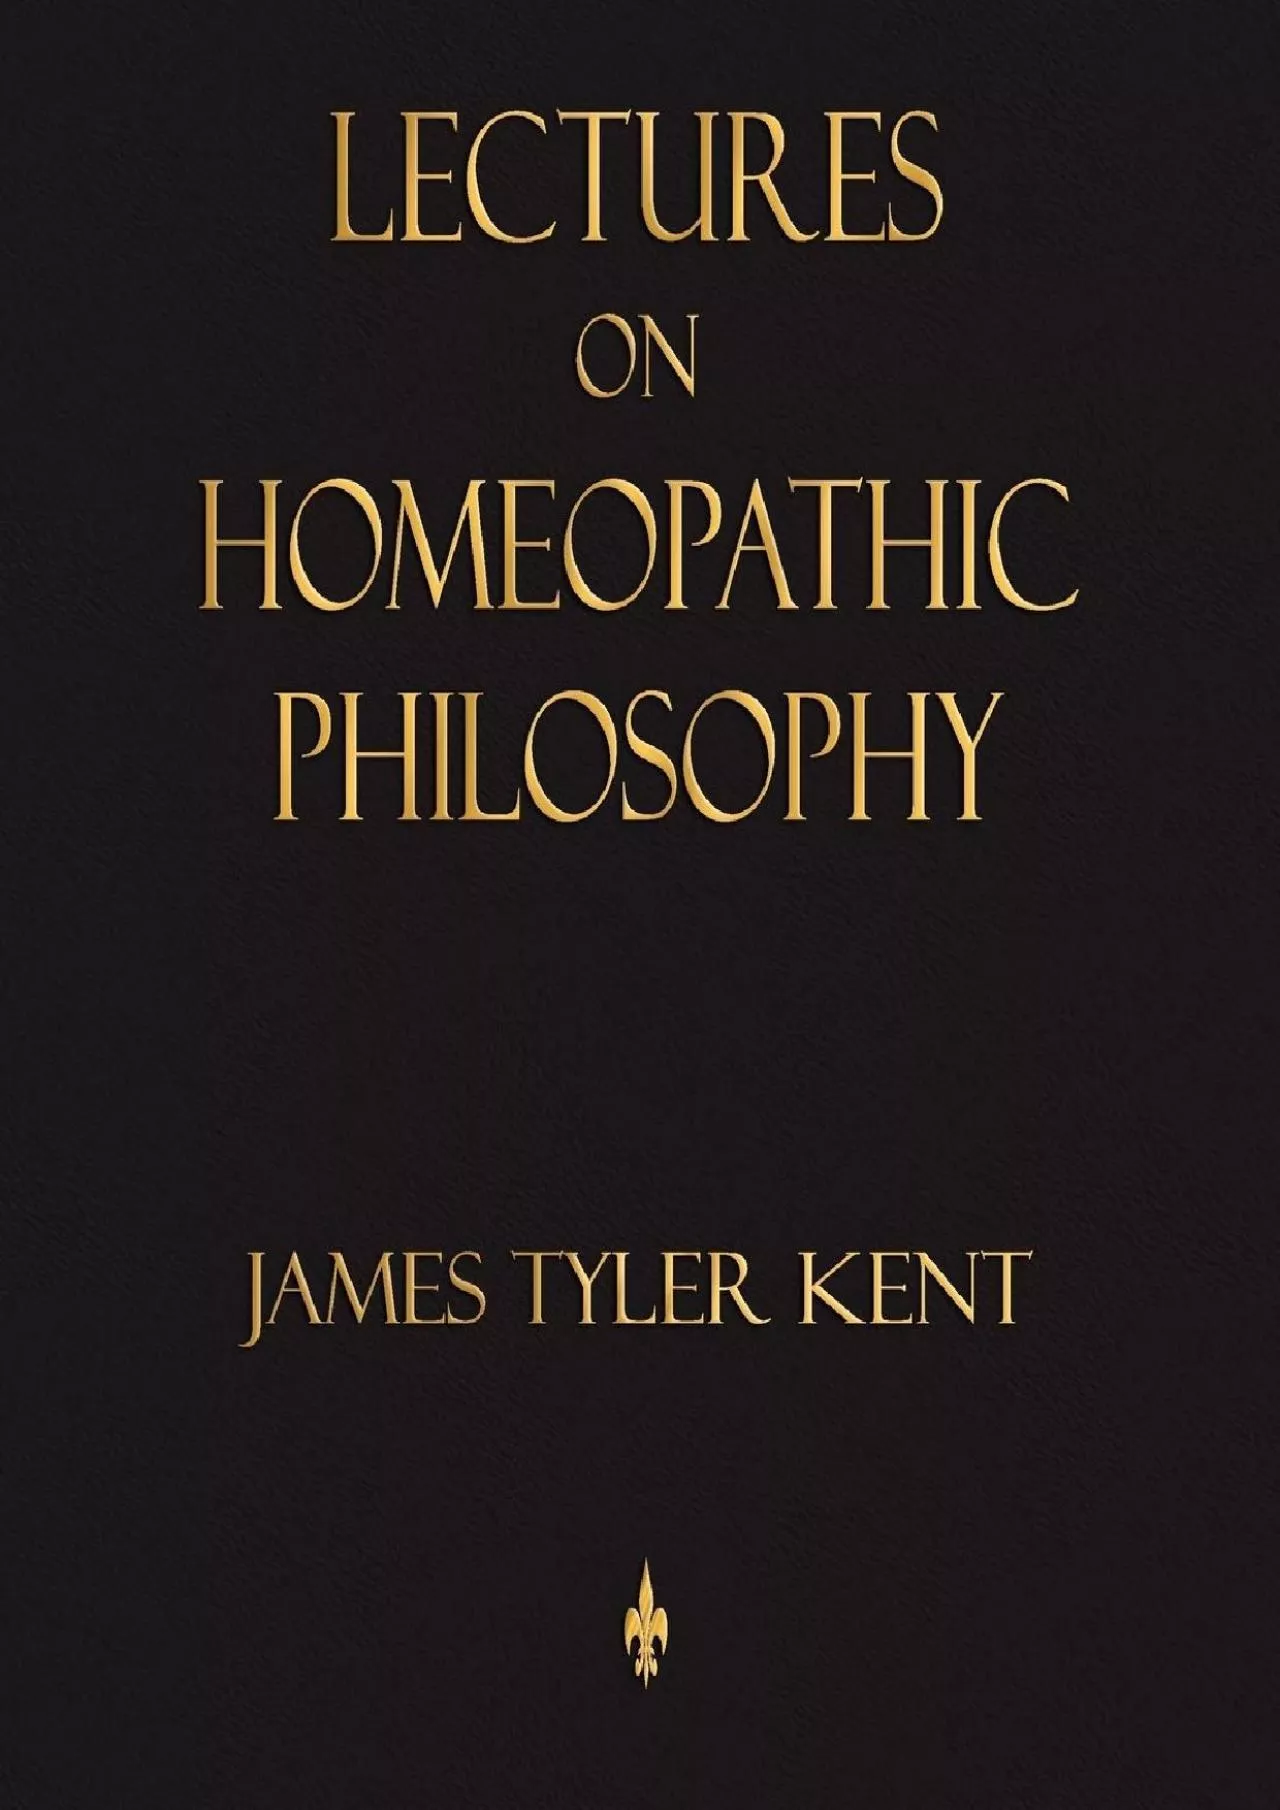 (EBOOK)-Lectures on Homeopathic Philosophy